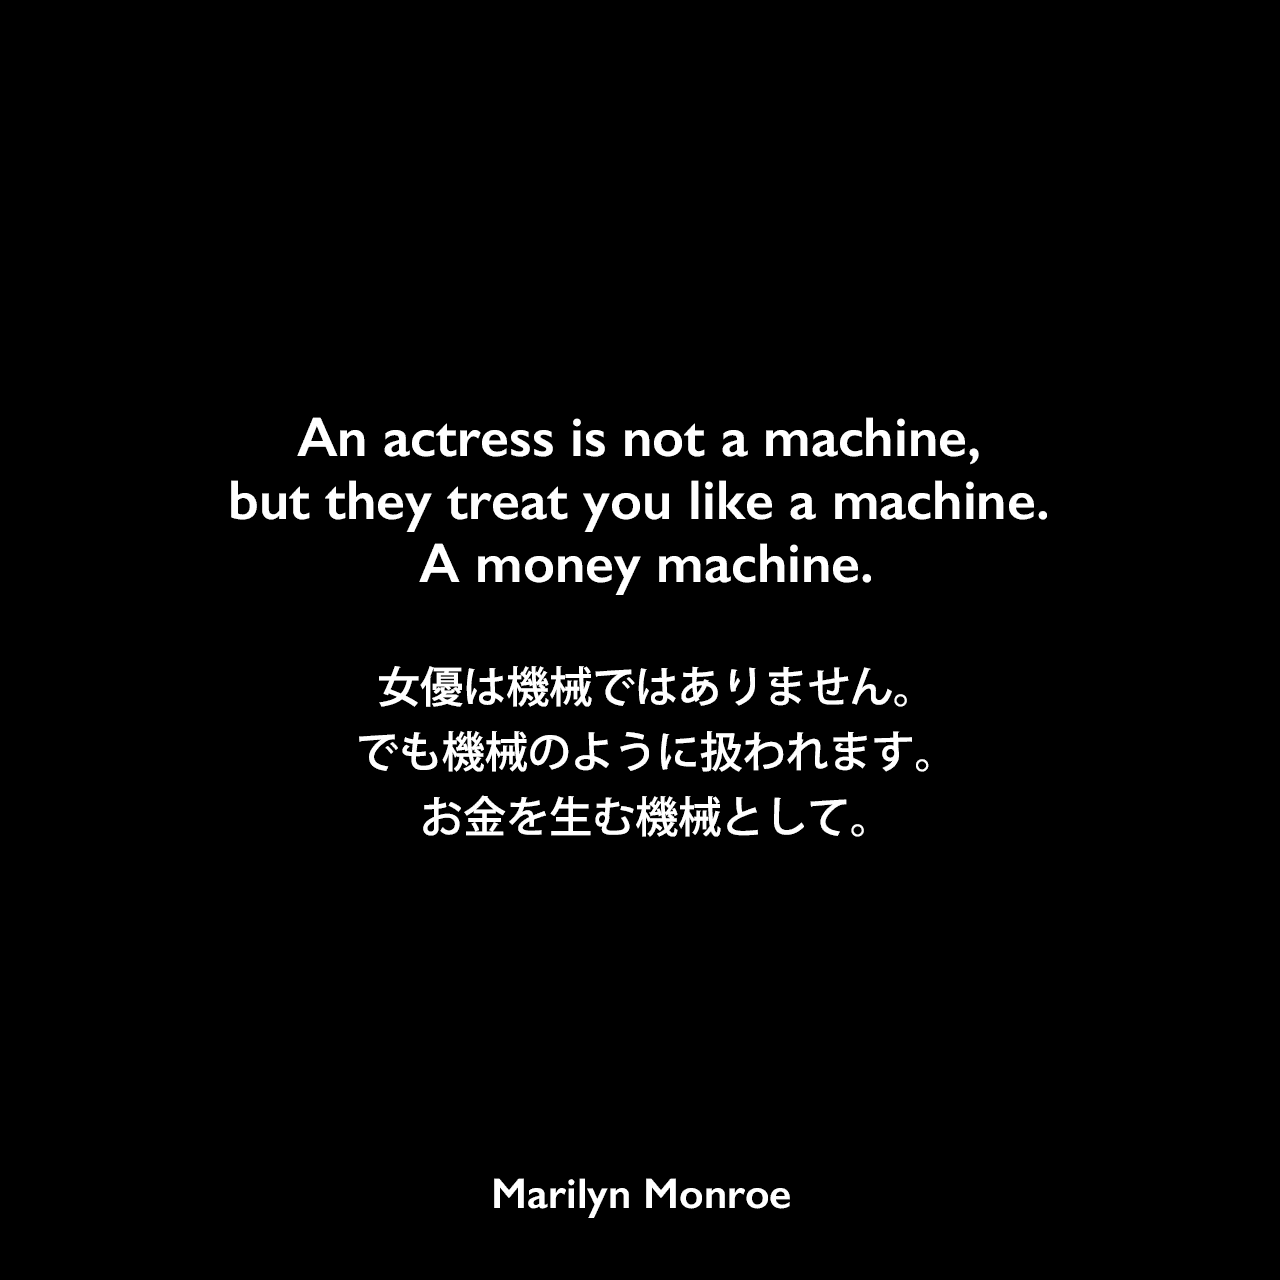 An actress is not a machine, but they treat you like a machine. A money machine.女優は機械ではありません。でも機械のように扱われます。お金を生む機械として。Marilyn Monroe